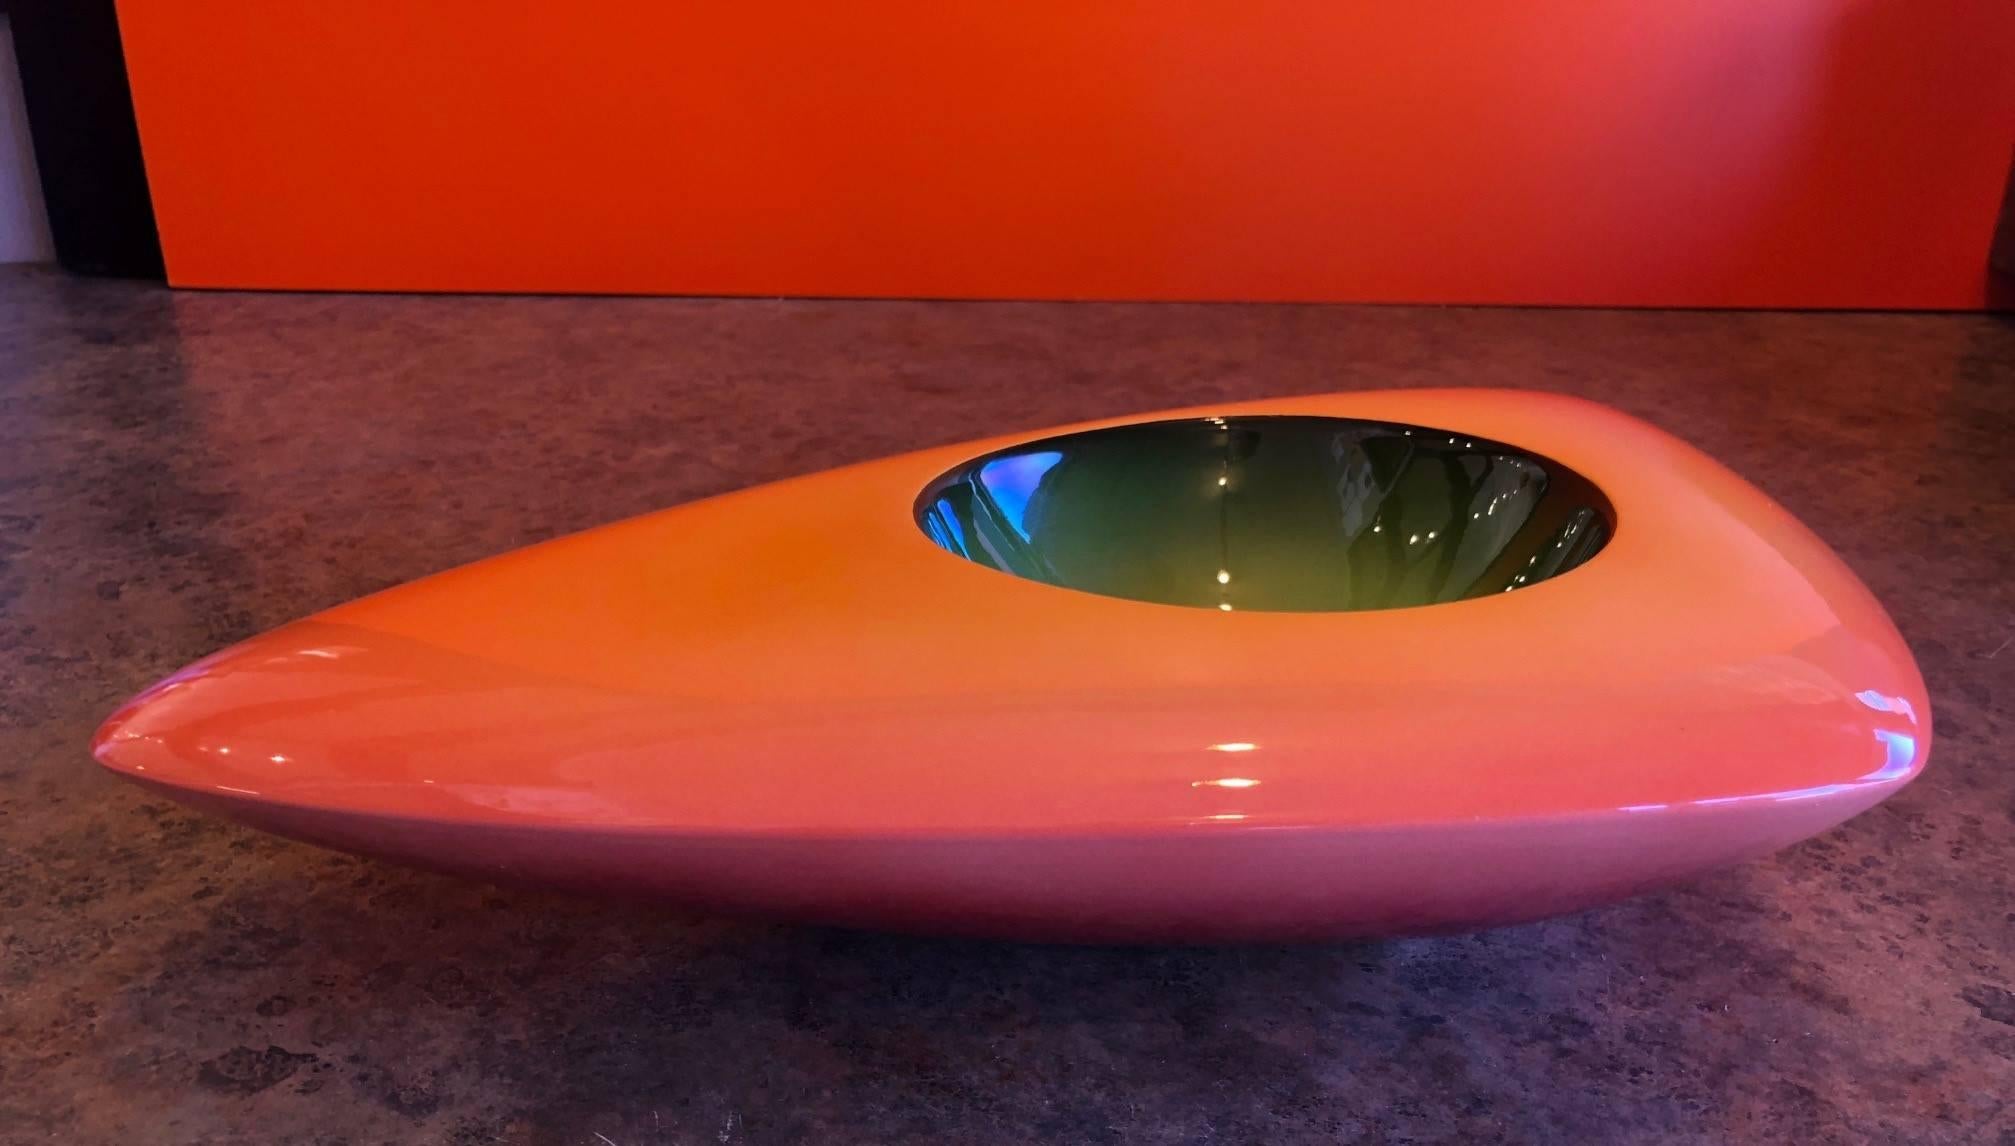 Vibrant model V-33 triangular earthenware bowl by California, artist Fred Stodder. The piece is signed and is 17.5